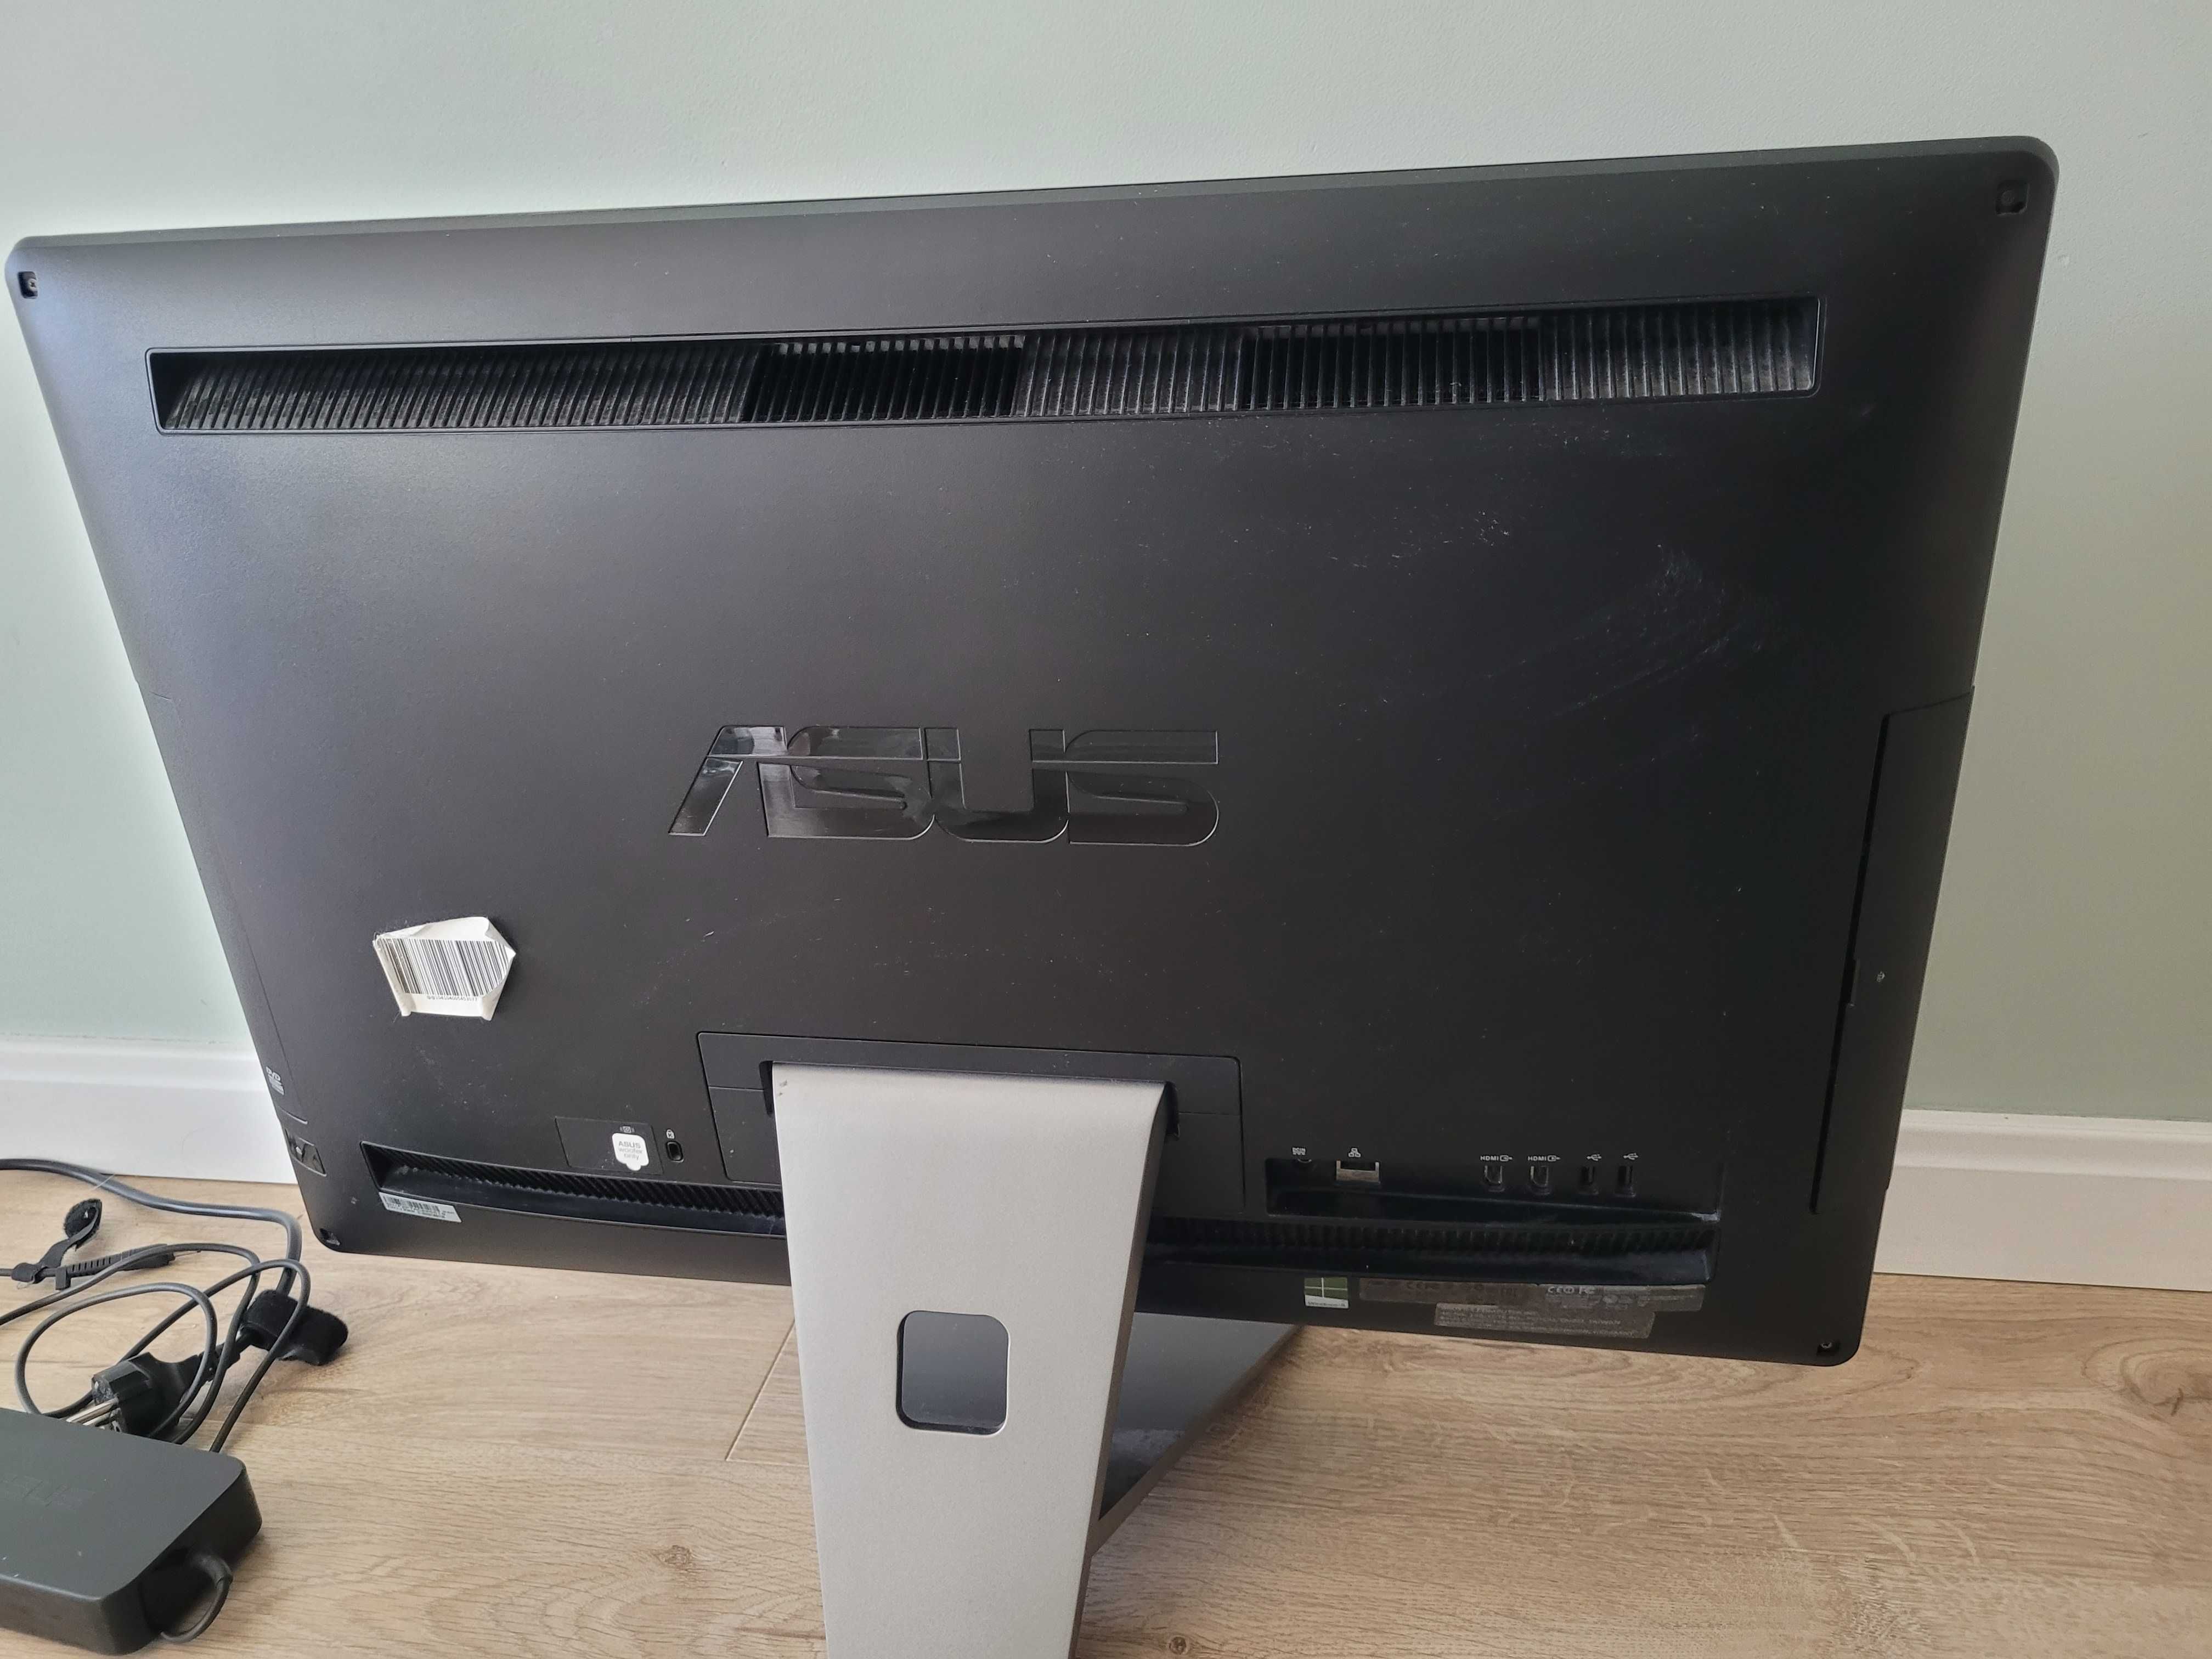 Komputer Asus all in one